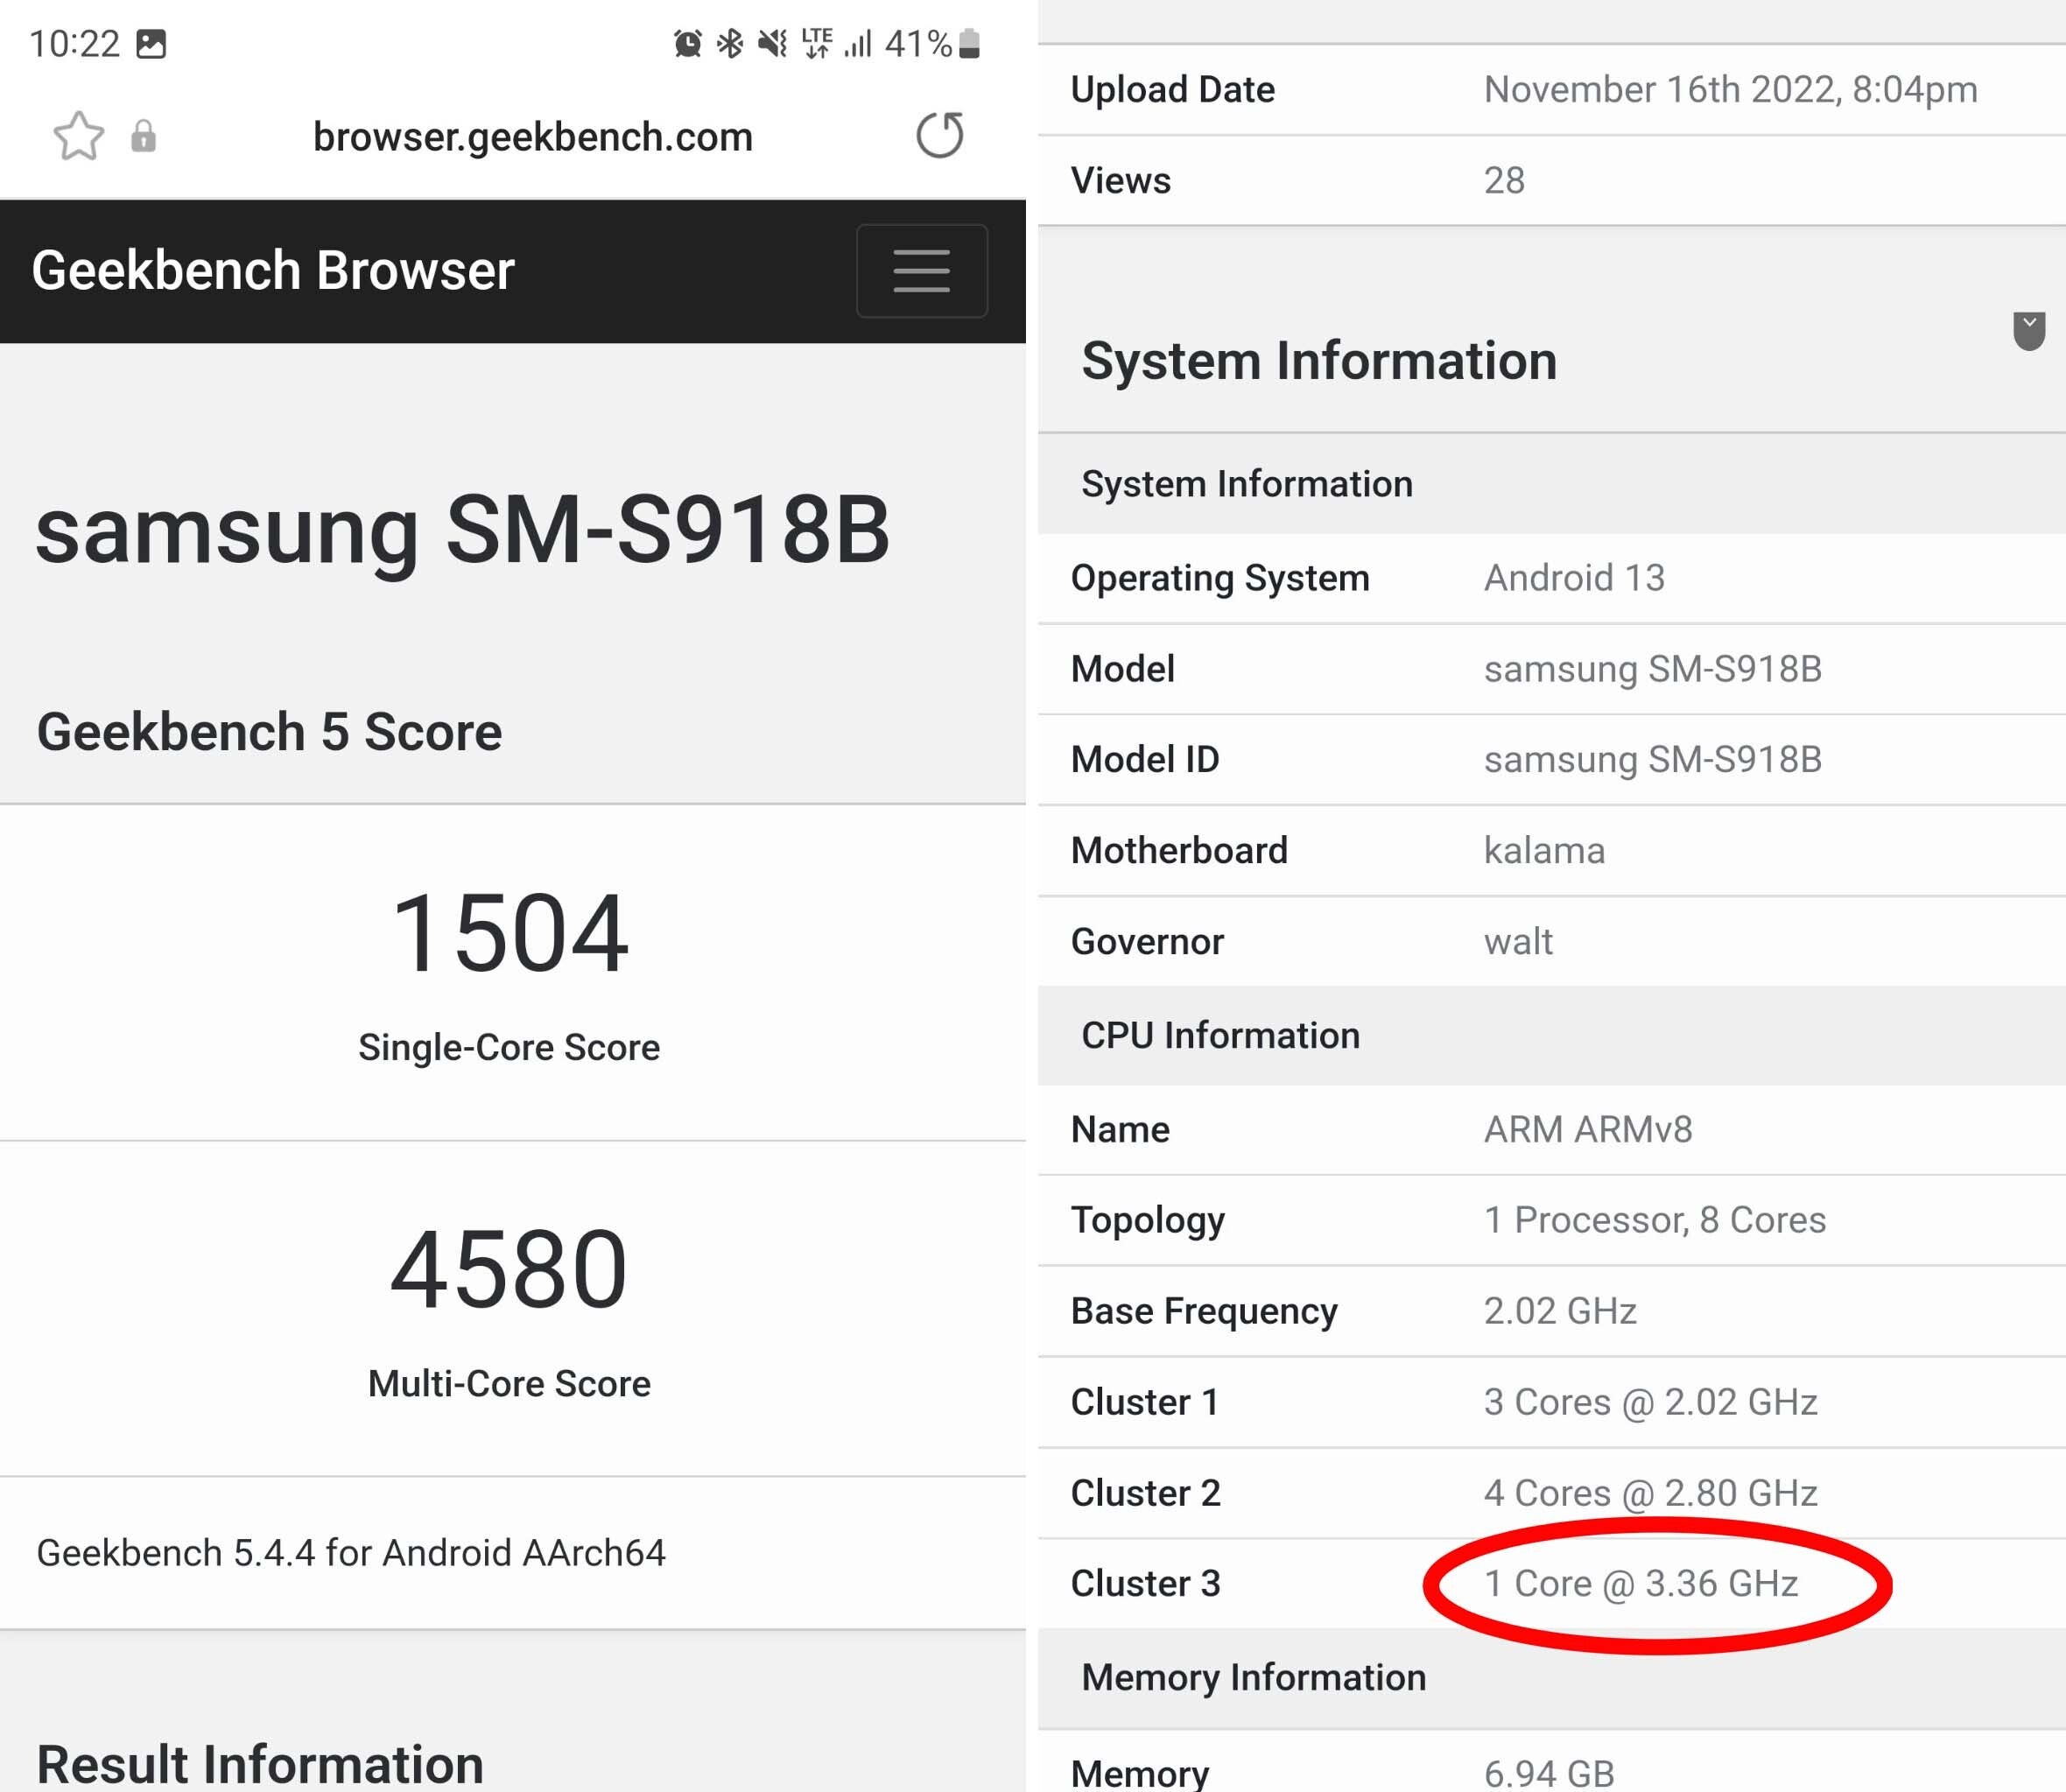 Image credit - @UniverseIce - Samsung reportedly has an overclocked Snapdragon 8 Gen 2 for the Galaxy S23 series